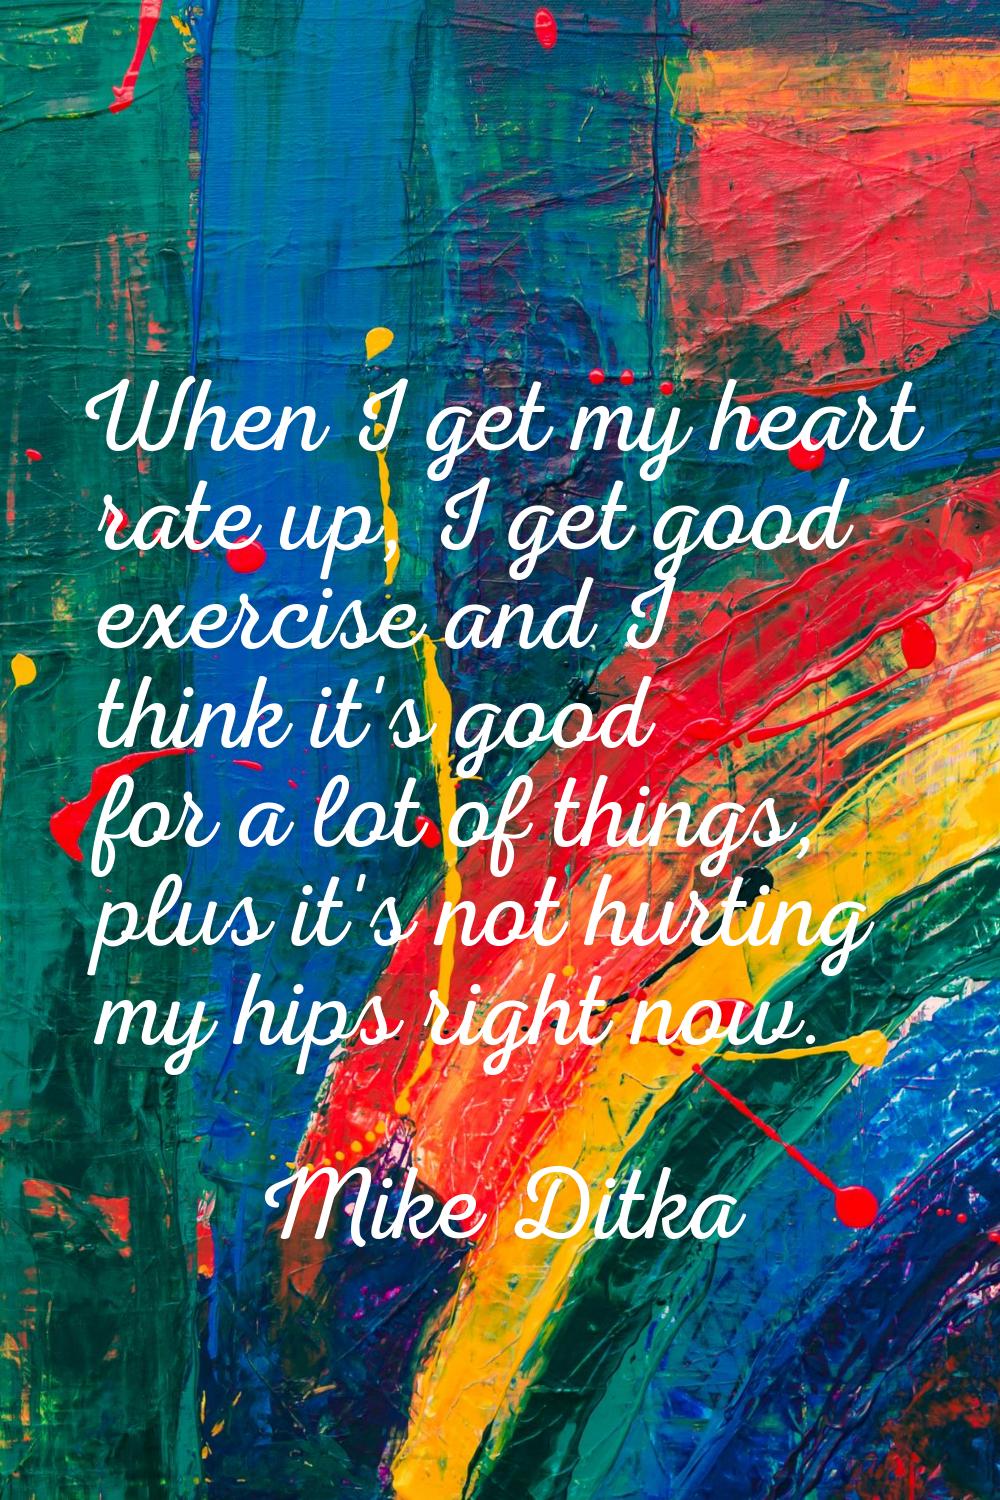 When I get my heart rate up, I get good exercise and I think it's good for a lot of things, plus it